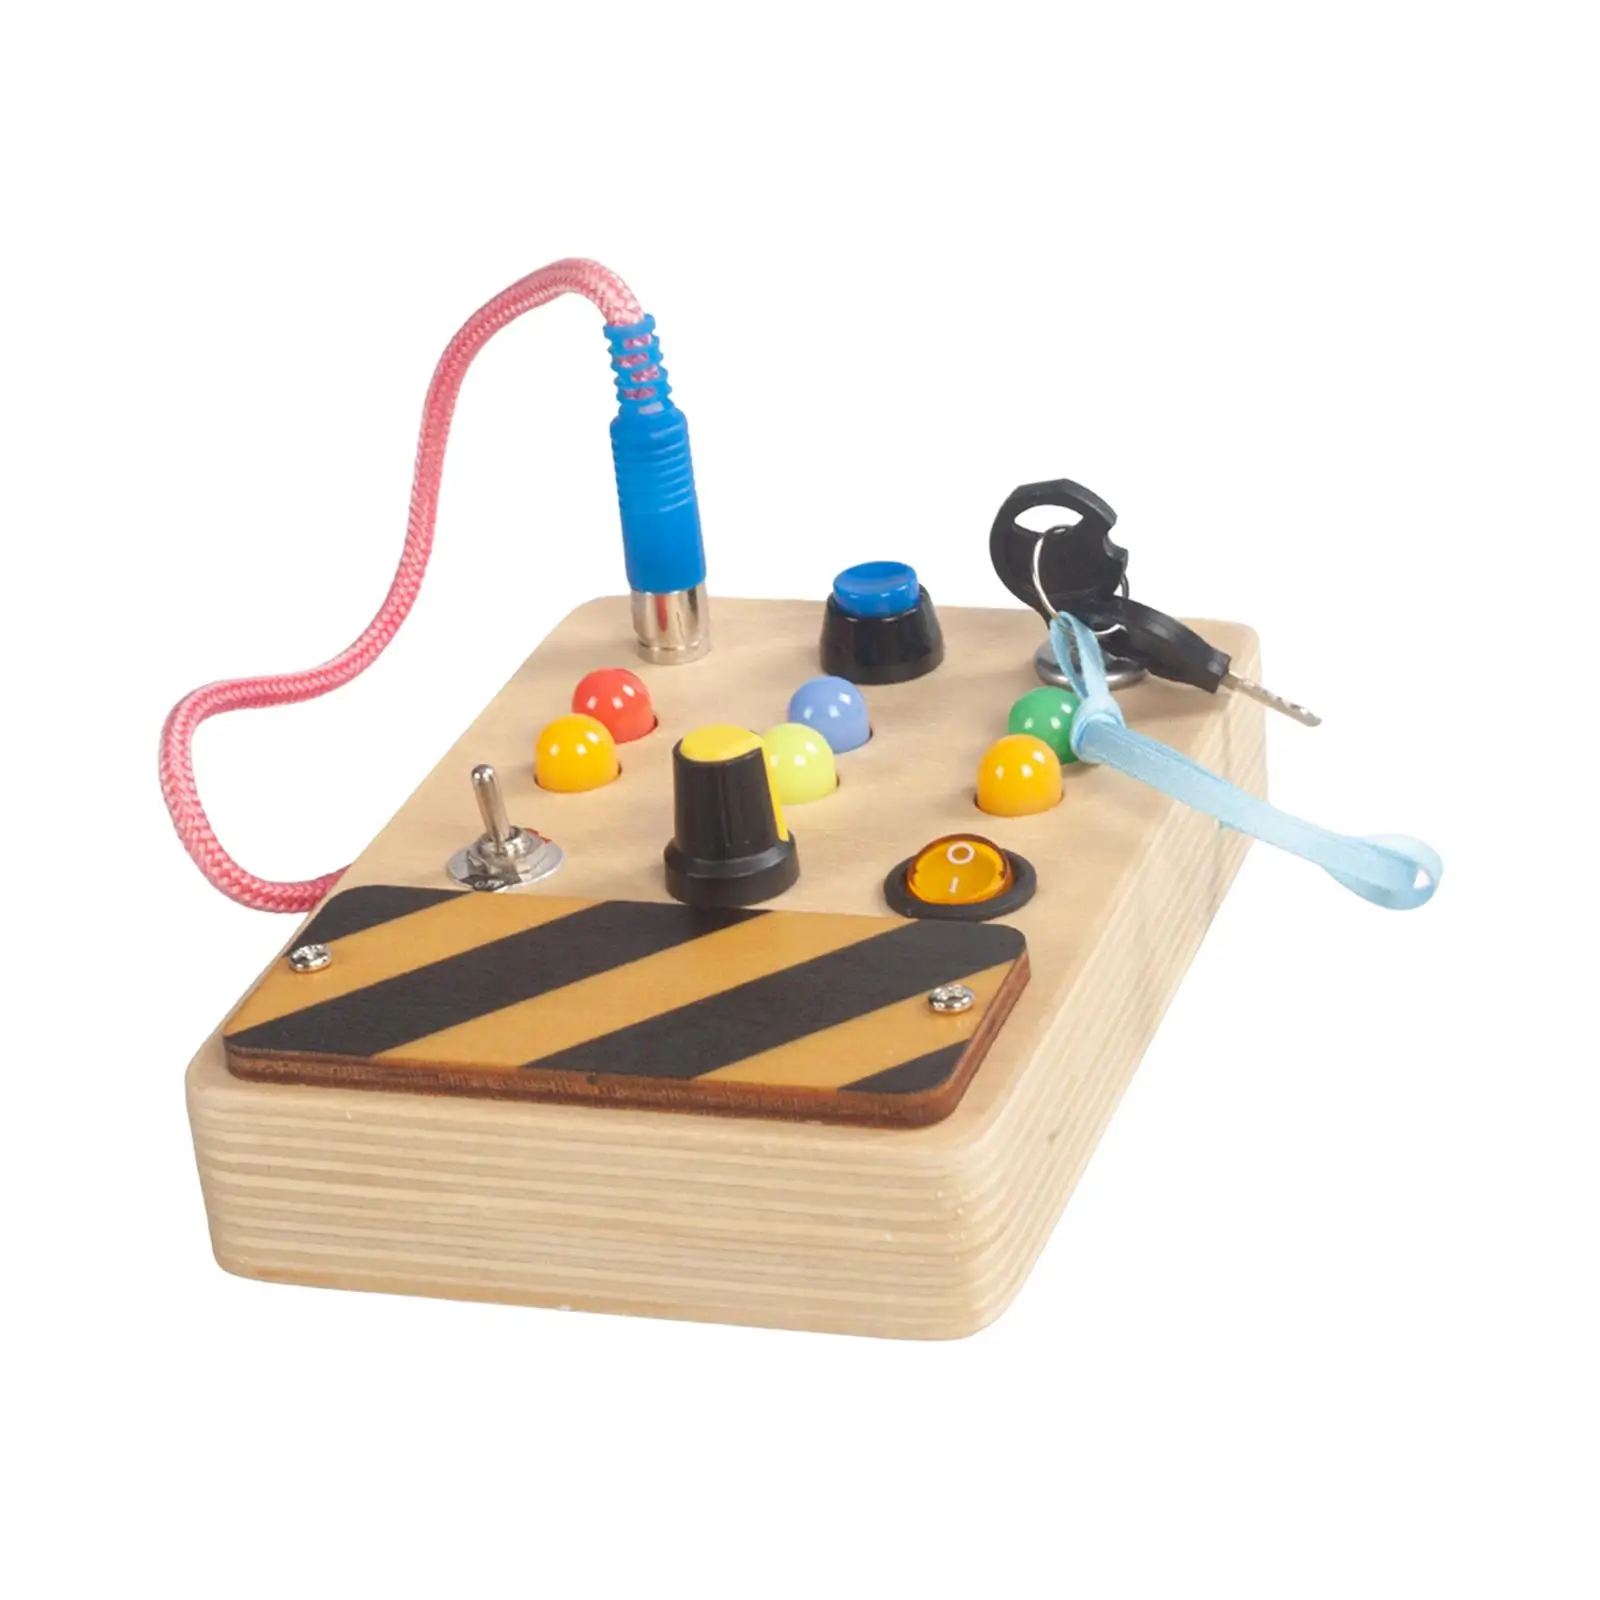 

Busy Board Sensory Toy with Toggle Switch Fine Motor Skills Montessori Toy for 2 3 4 Year Old Preschool Boys Girls Kids Gifts